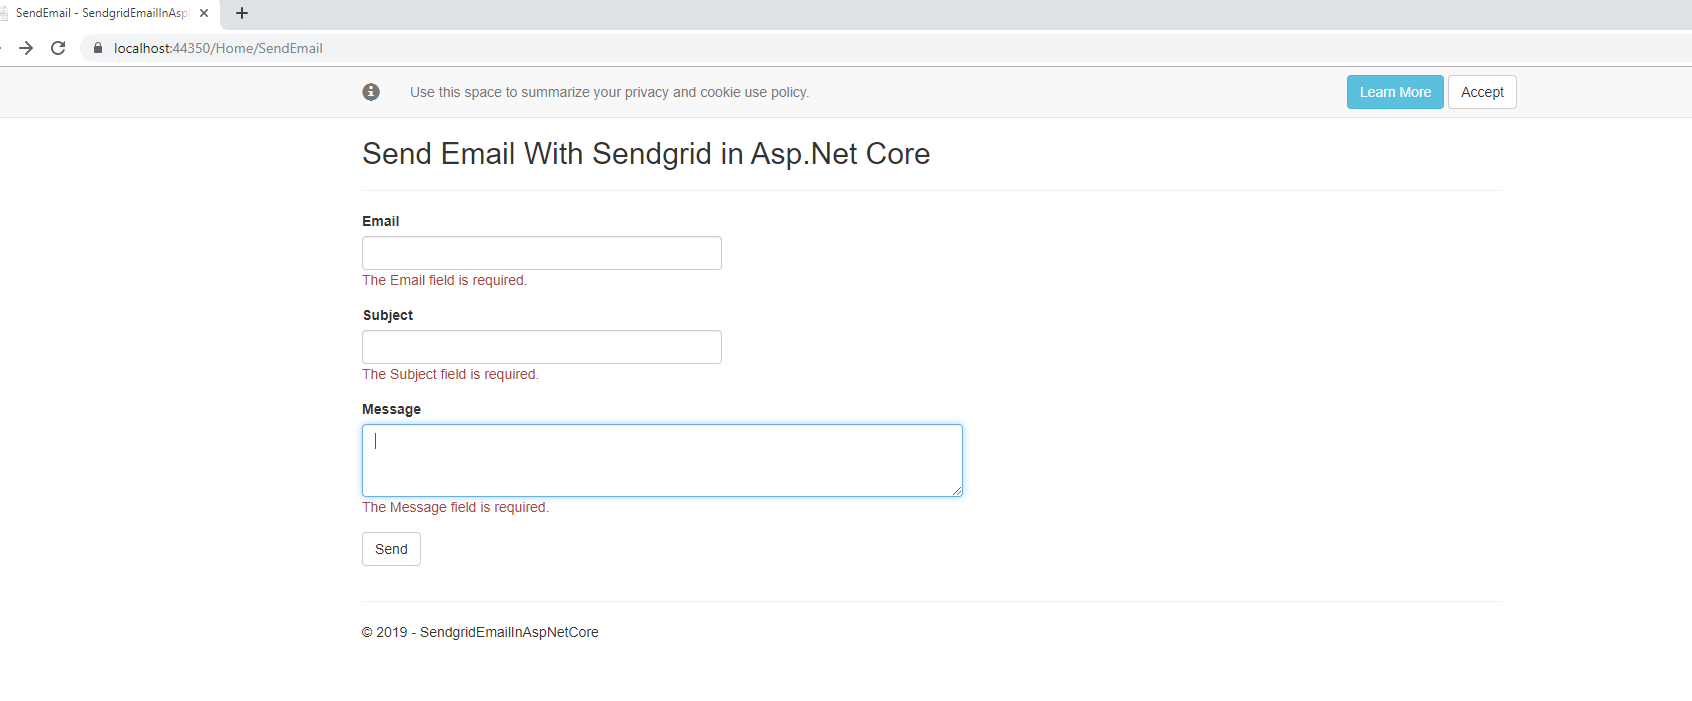 Testing the Asp.net Core Email With Sendgrid with empty inputs